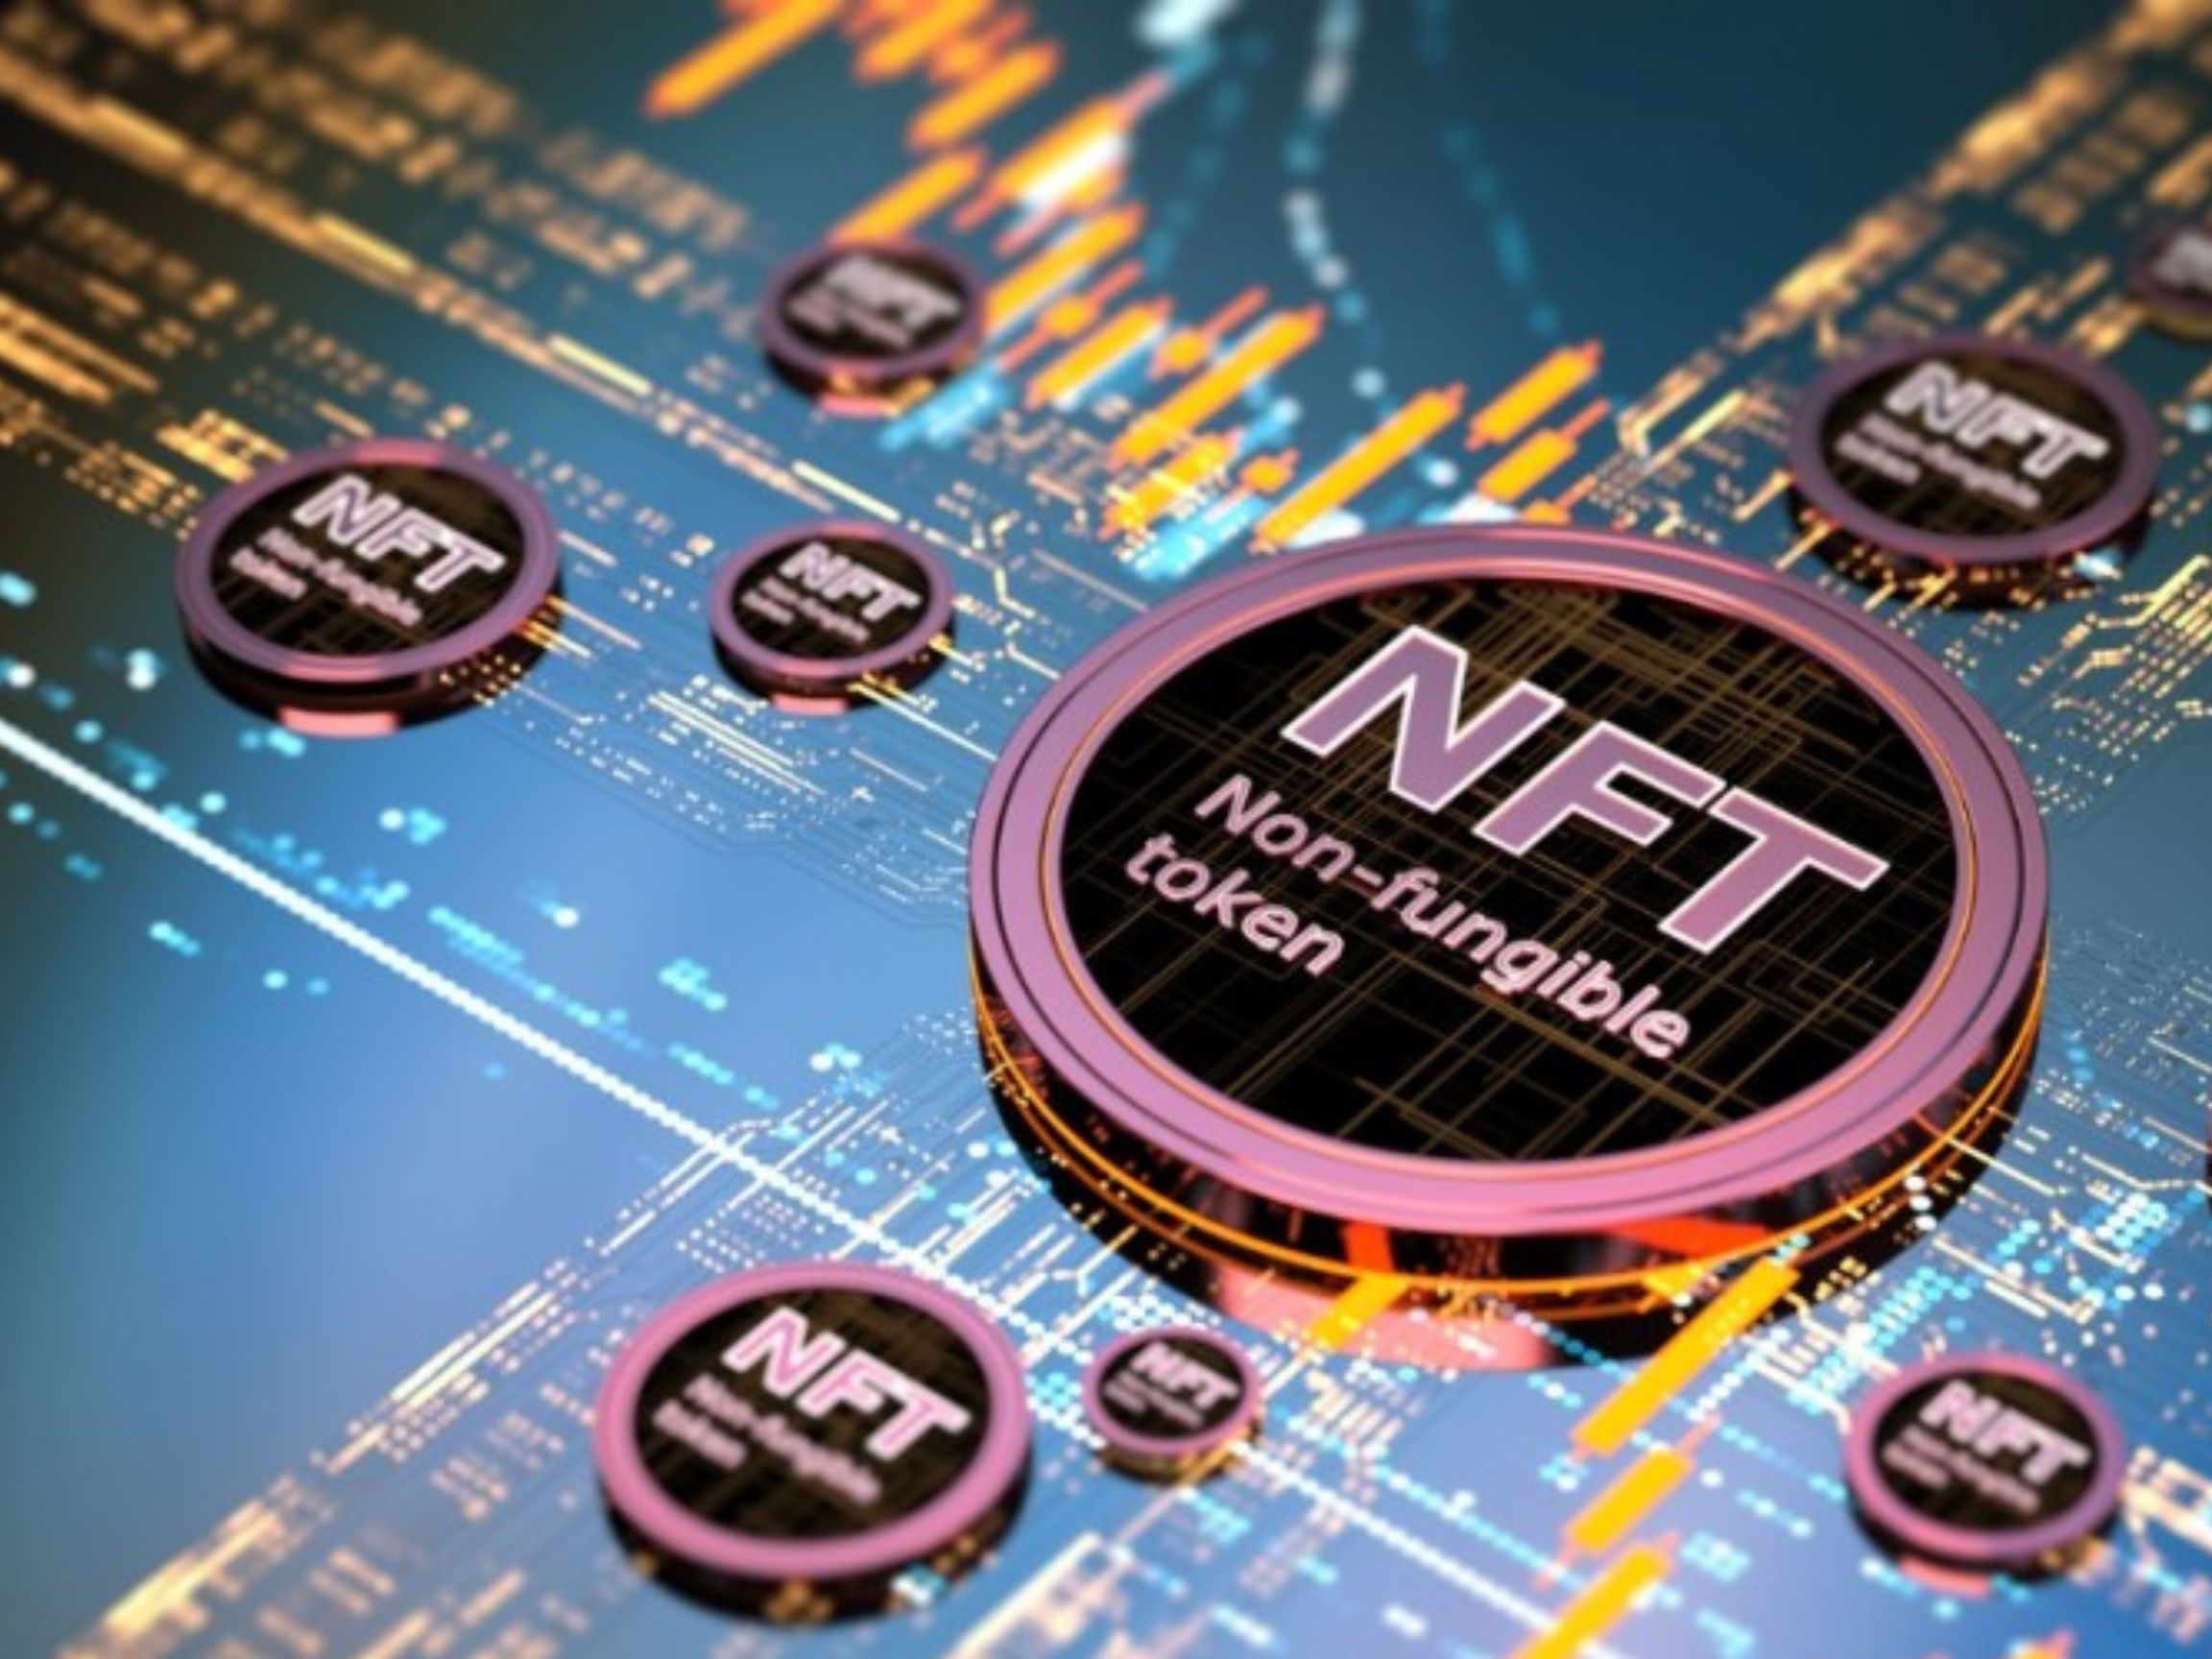 Client Alert: Court Authorizes First-Ever Service of Court Documents via Air-Drop of Non-Fungible Token (NFT) to Cryptocurrency Wallet Address